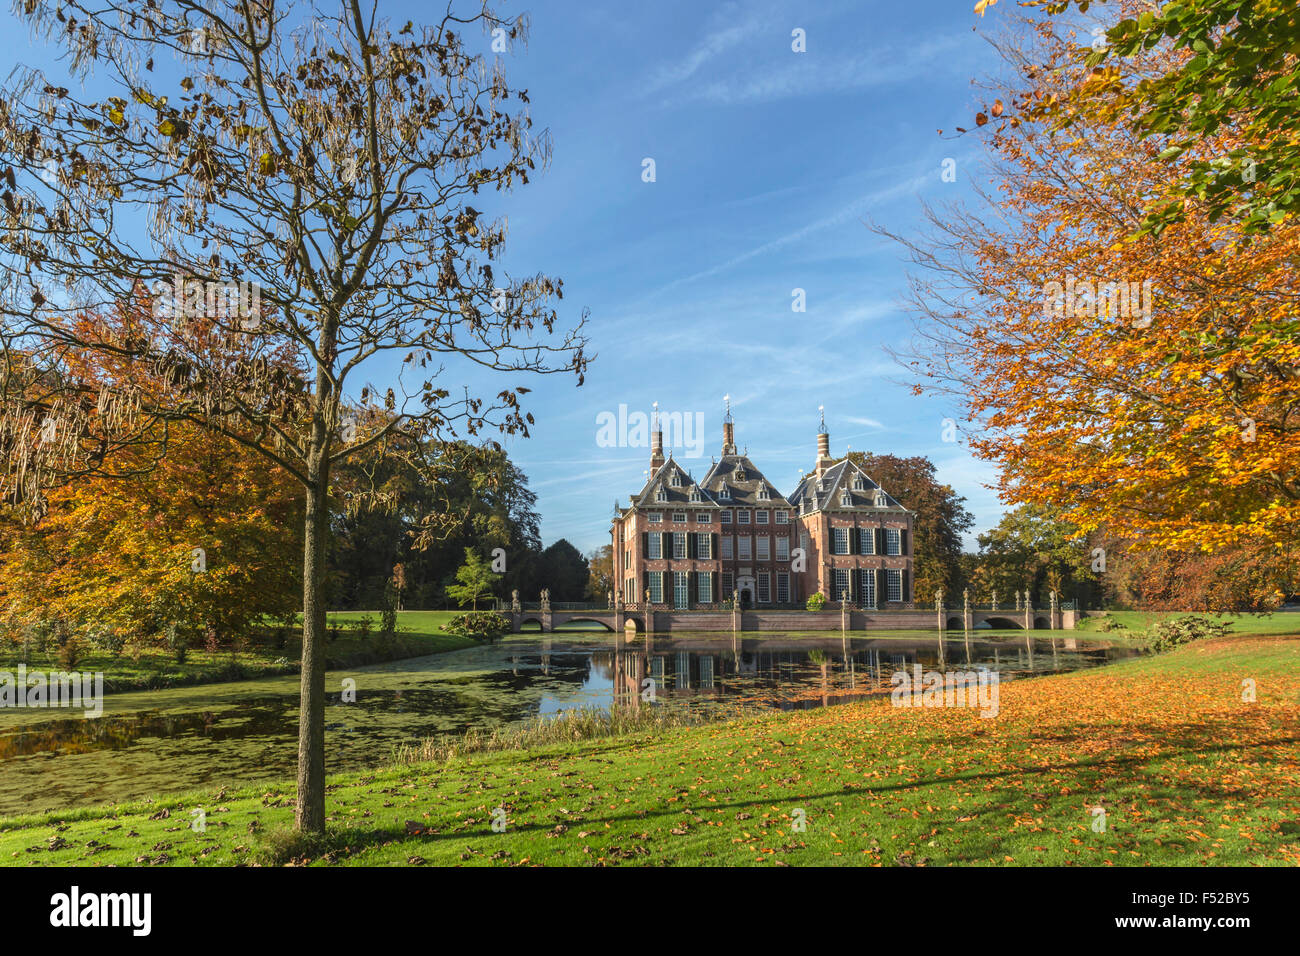 Fall colors at Duivenvoorde Castle, Voorschoten, South Holland, The Netherlands. Build in 1631 and with English landscape park. Stock Photo